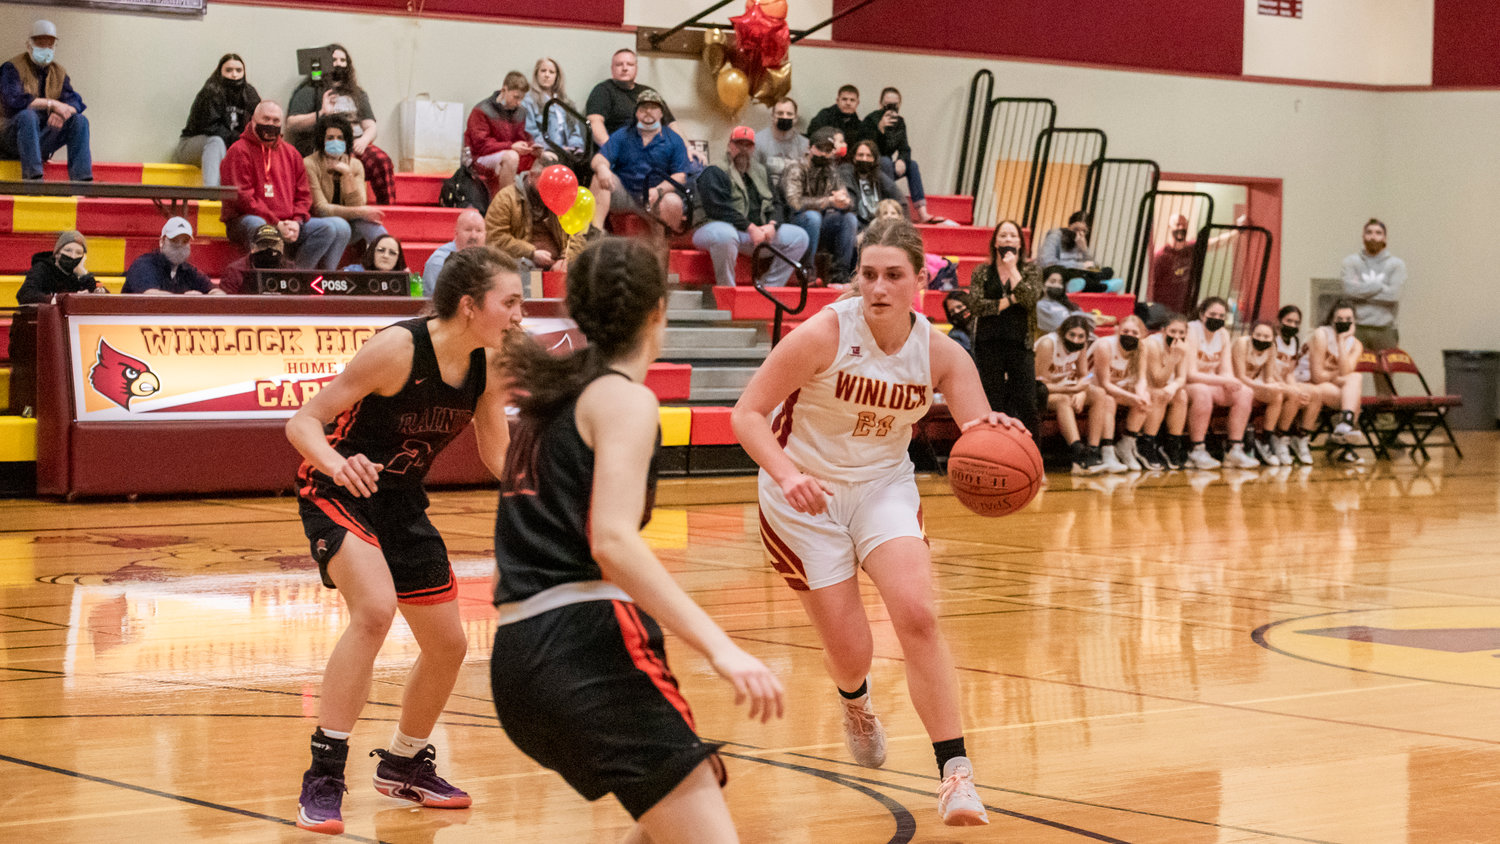 Winlock’s Addison Hall (24) dribbles in on defenders during a game against Rainier Wednesday night at Winlock High School.